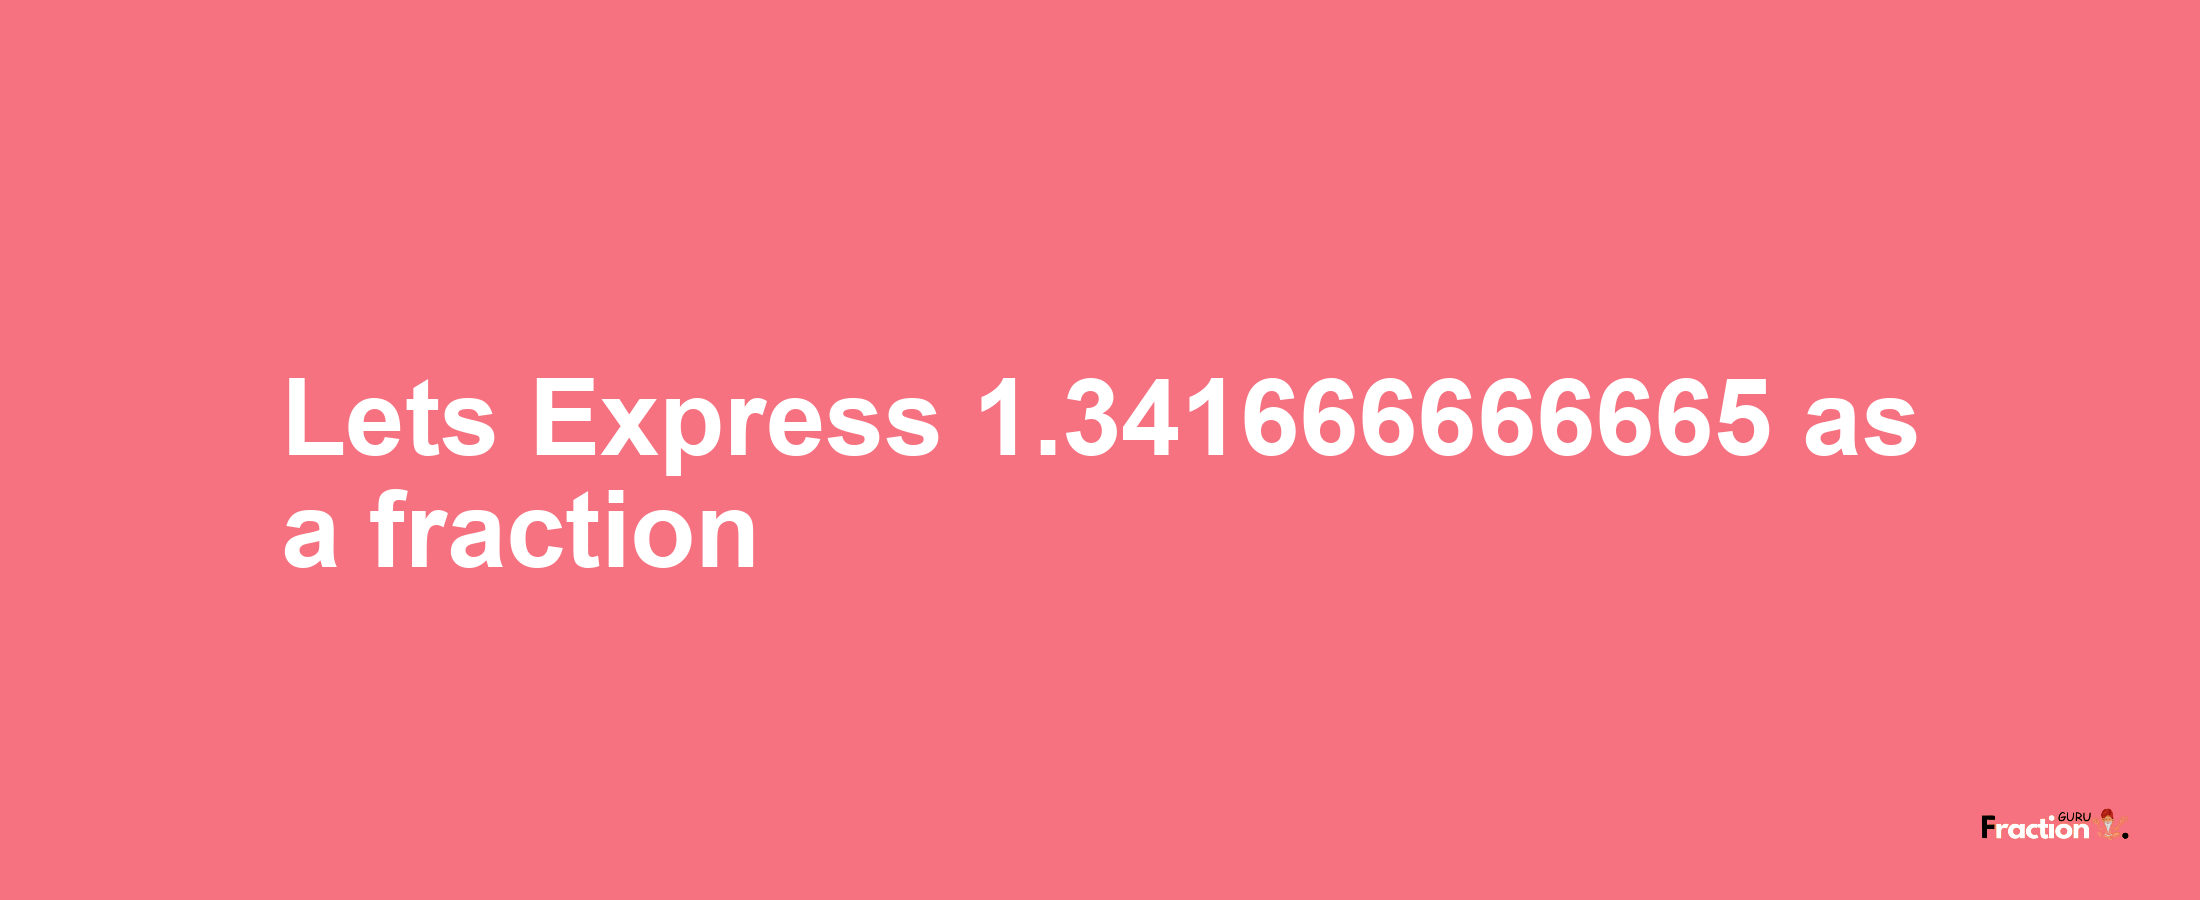 Lets Express 1.341666666665 as afraction